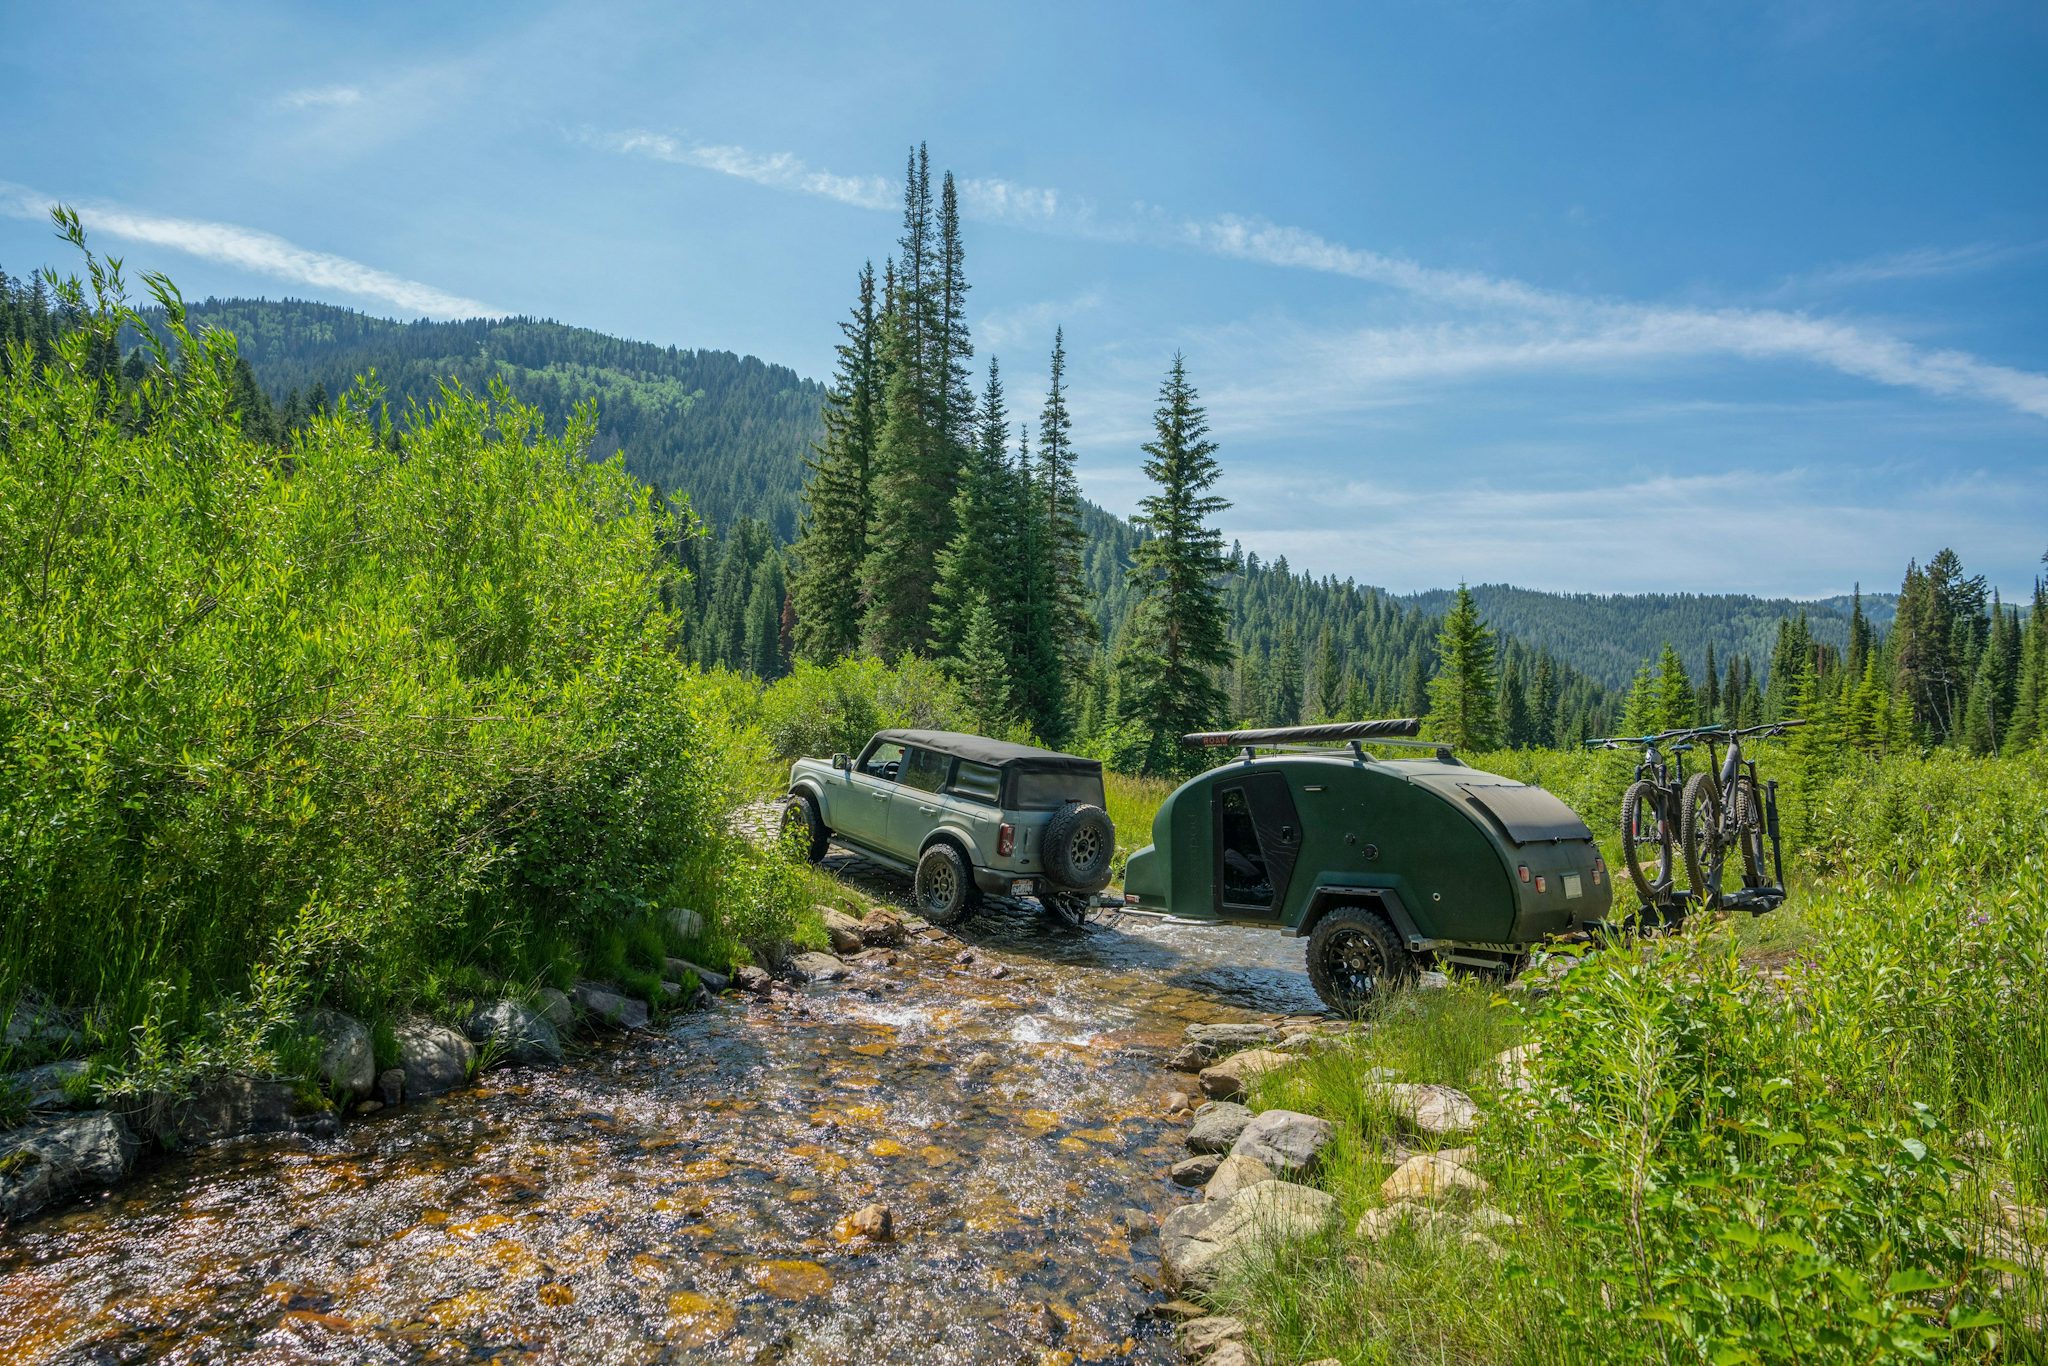 A Ford Bronco crosses a mountain stream while towing a TOPO2 off-road camping trailer. The grasses flanking the stream are bright green and tall pine trees cover the hillside in the distance.